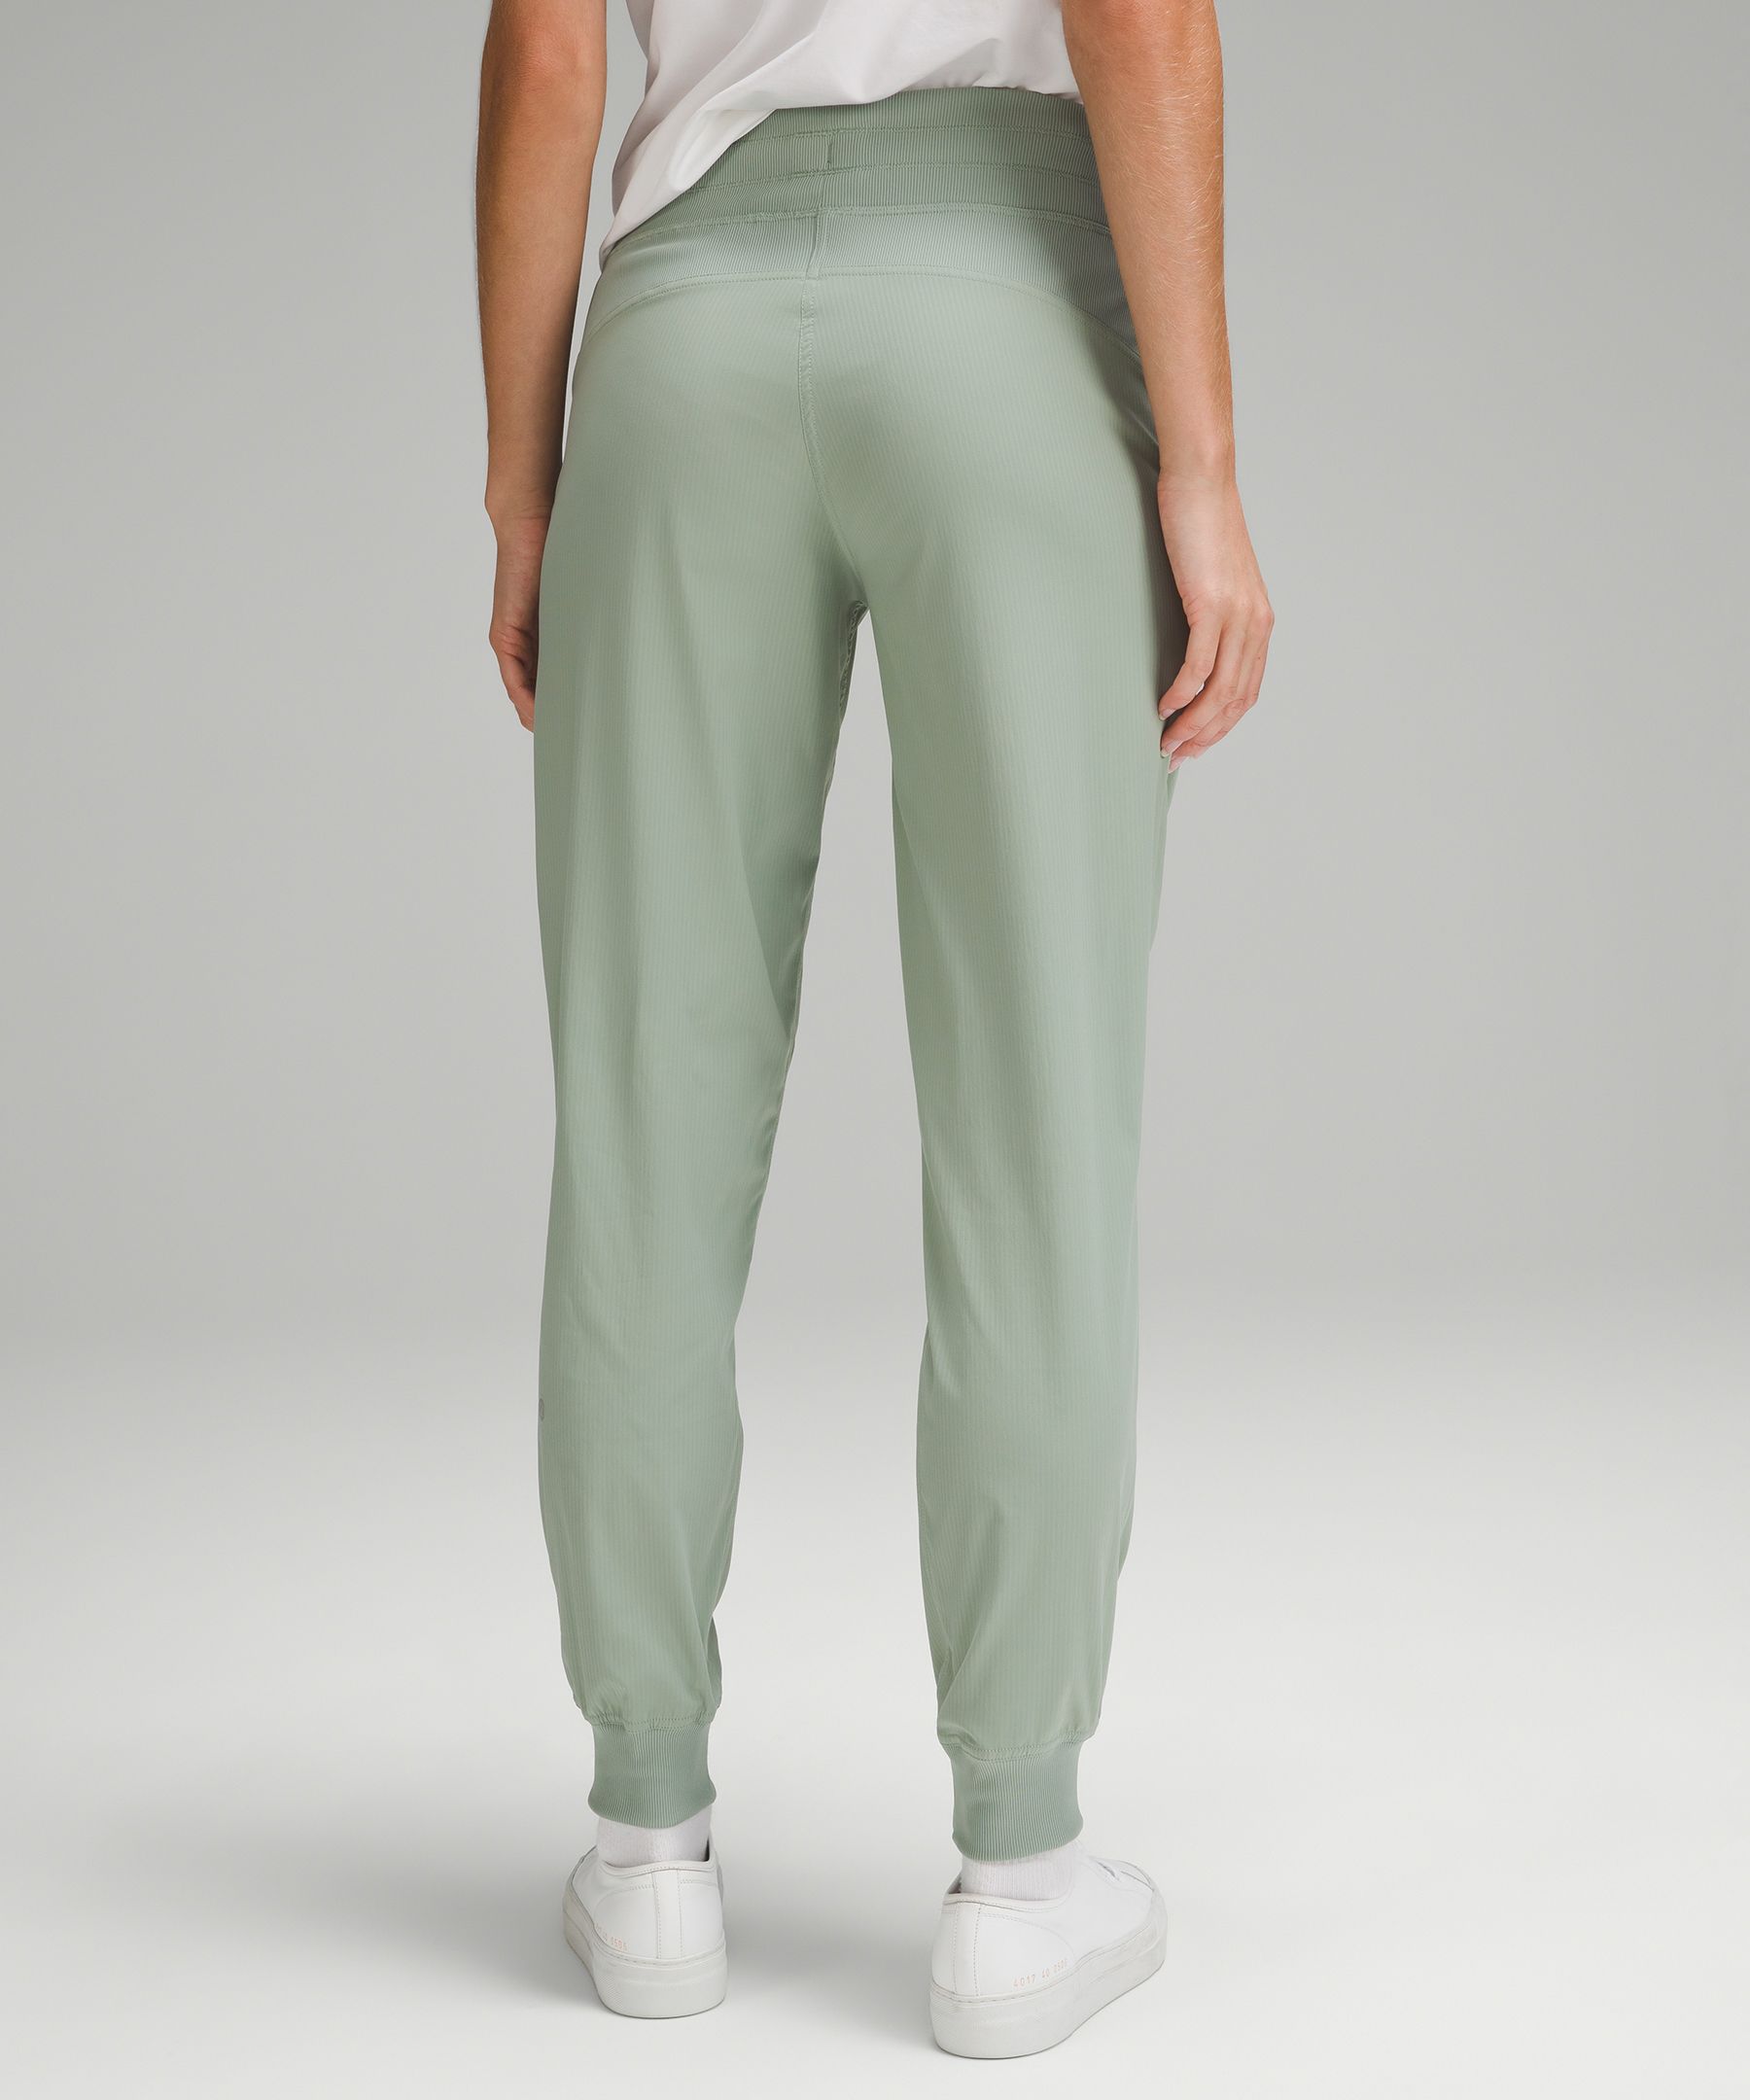 Lululemon Dance Studio Pants Green Size 2 - $70 (40% Off Retail) - From  Lindsey